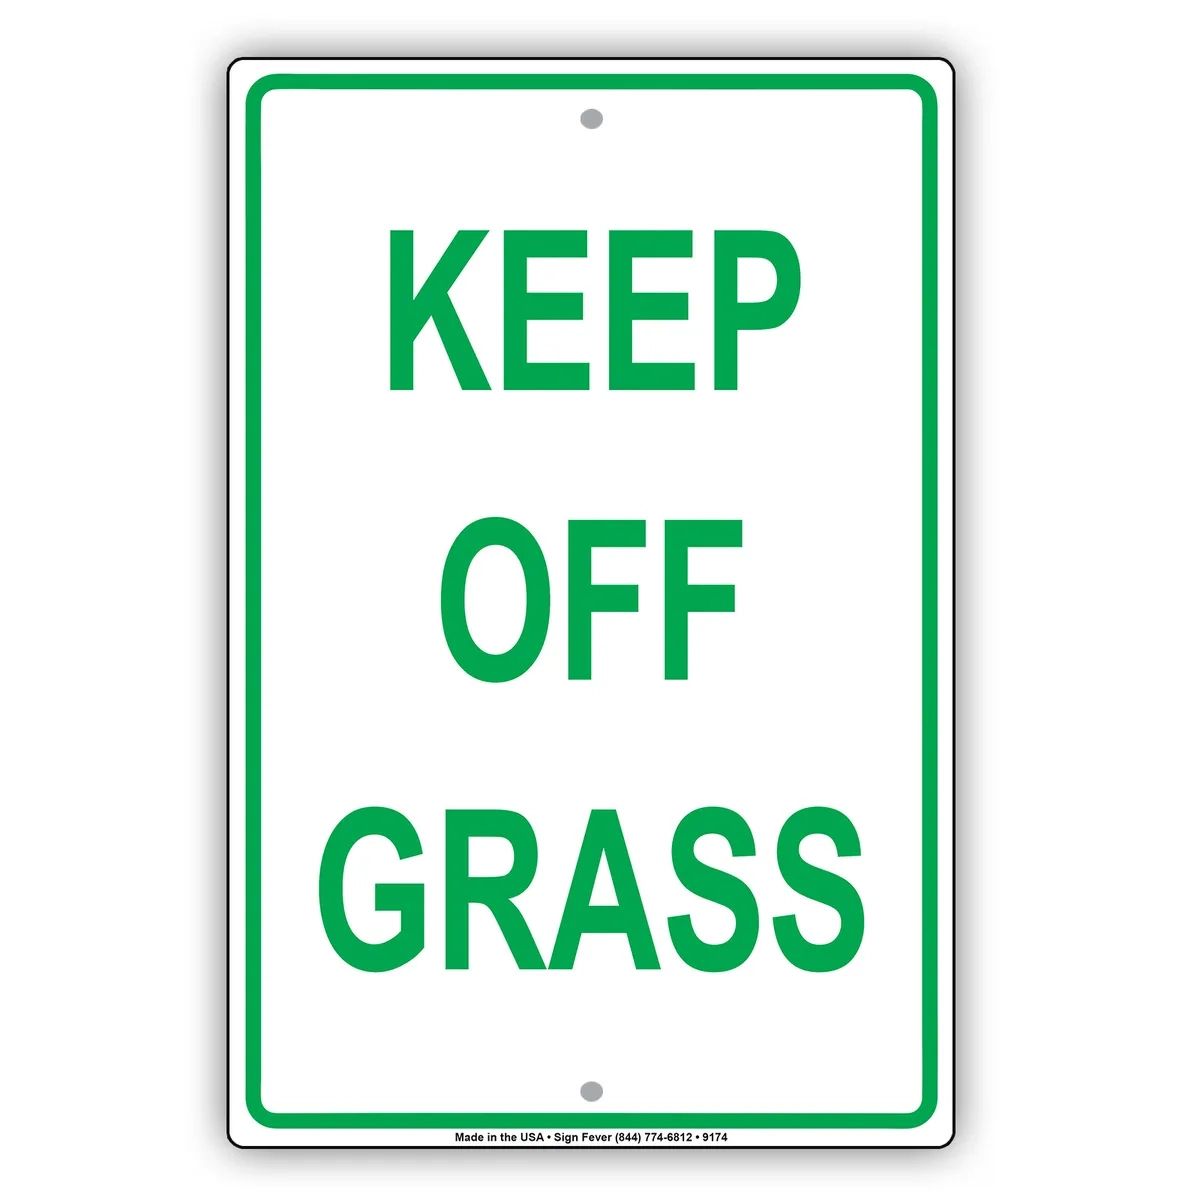 Keep Off Grass Wall Art Decor Novelty Notice Caution Aluminum Metal Sign |  Ebay Intended For Metal Sign Stake Wall Art (View 10 of 15)